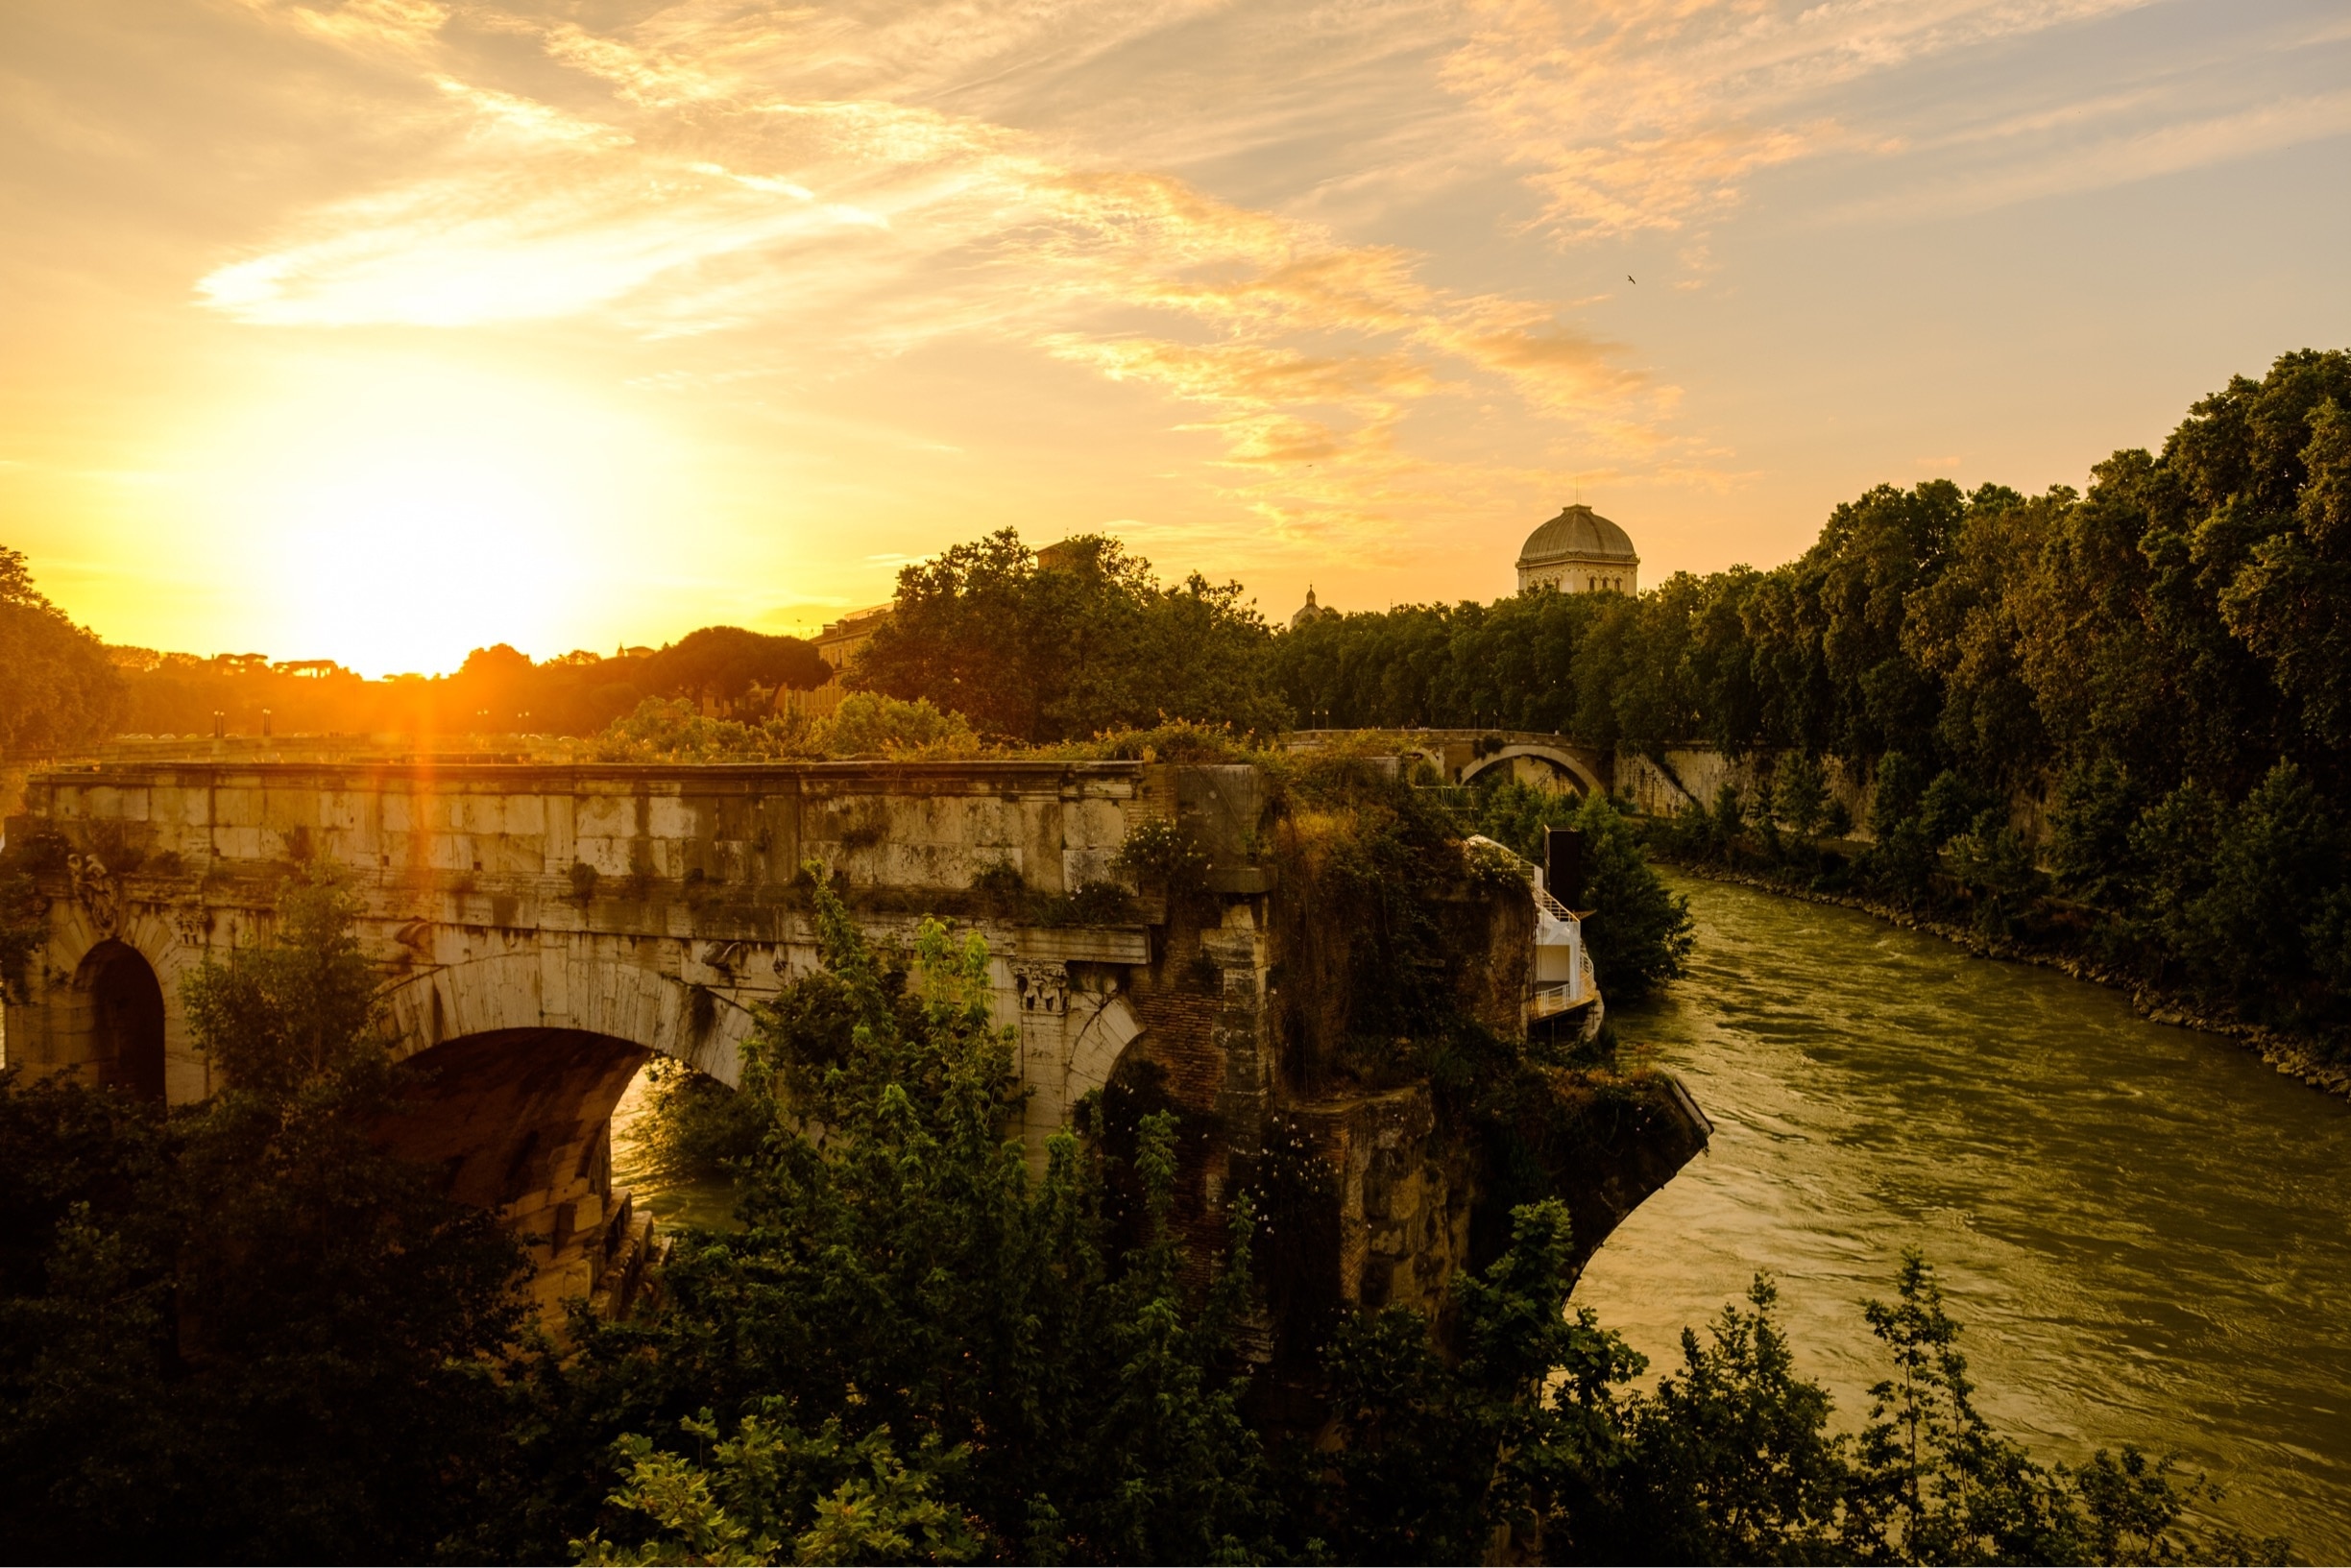 Sunset at one of the bridge ruin at Tiber River
#golden